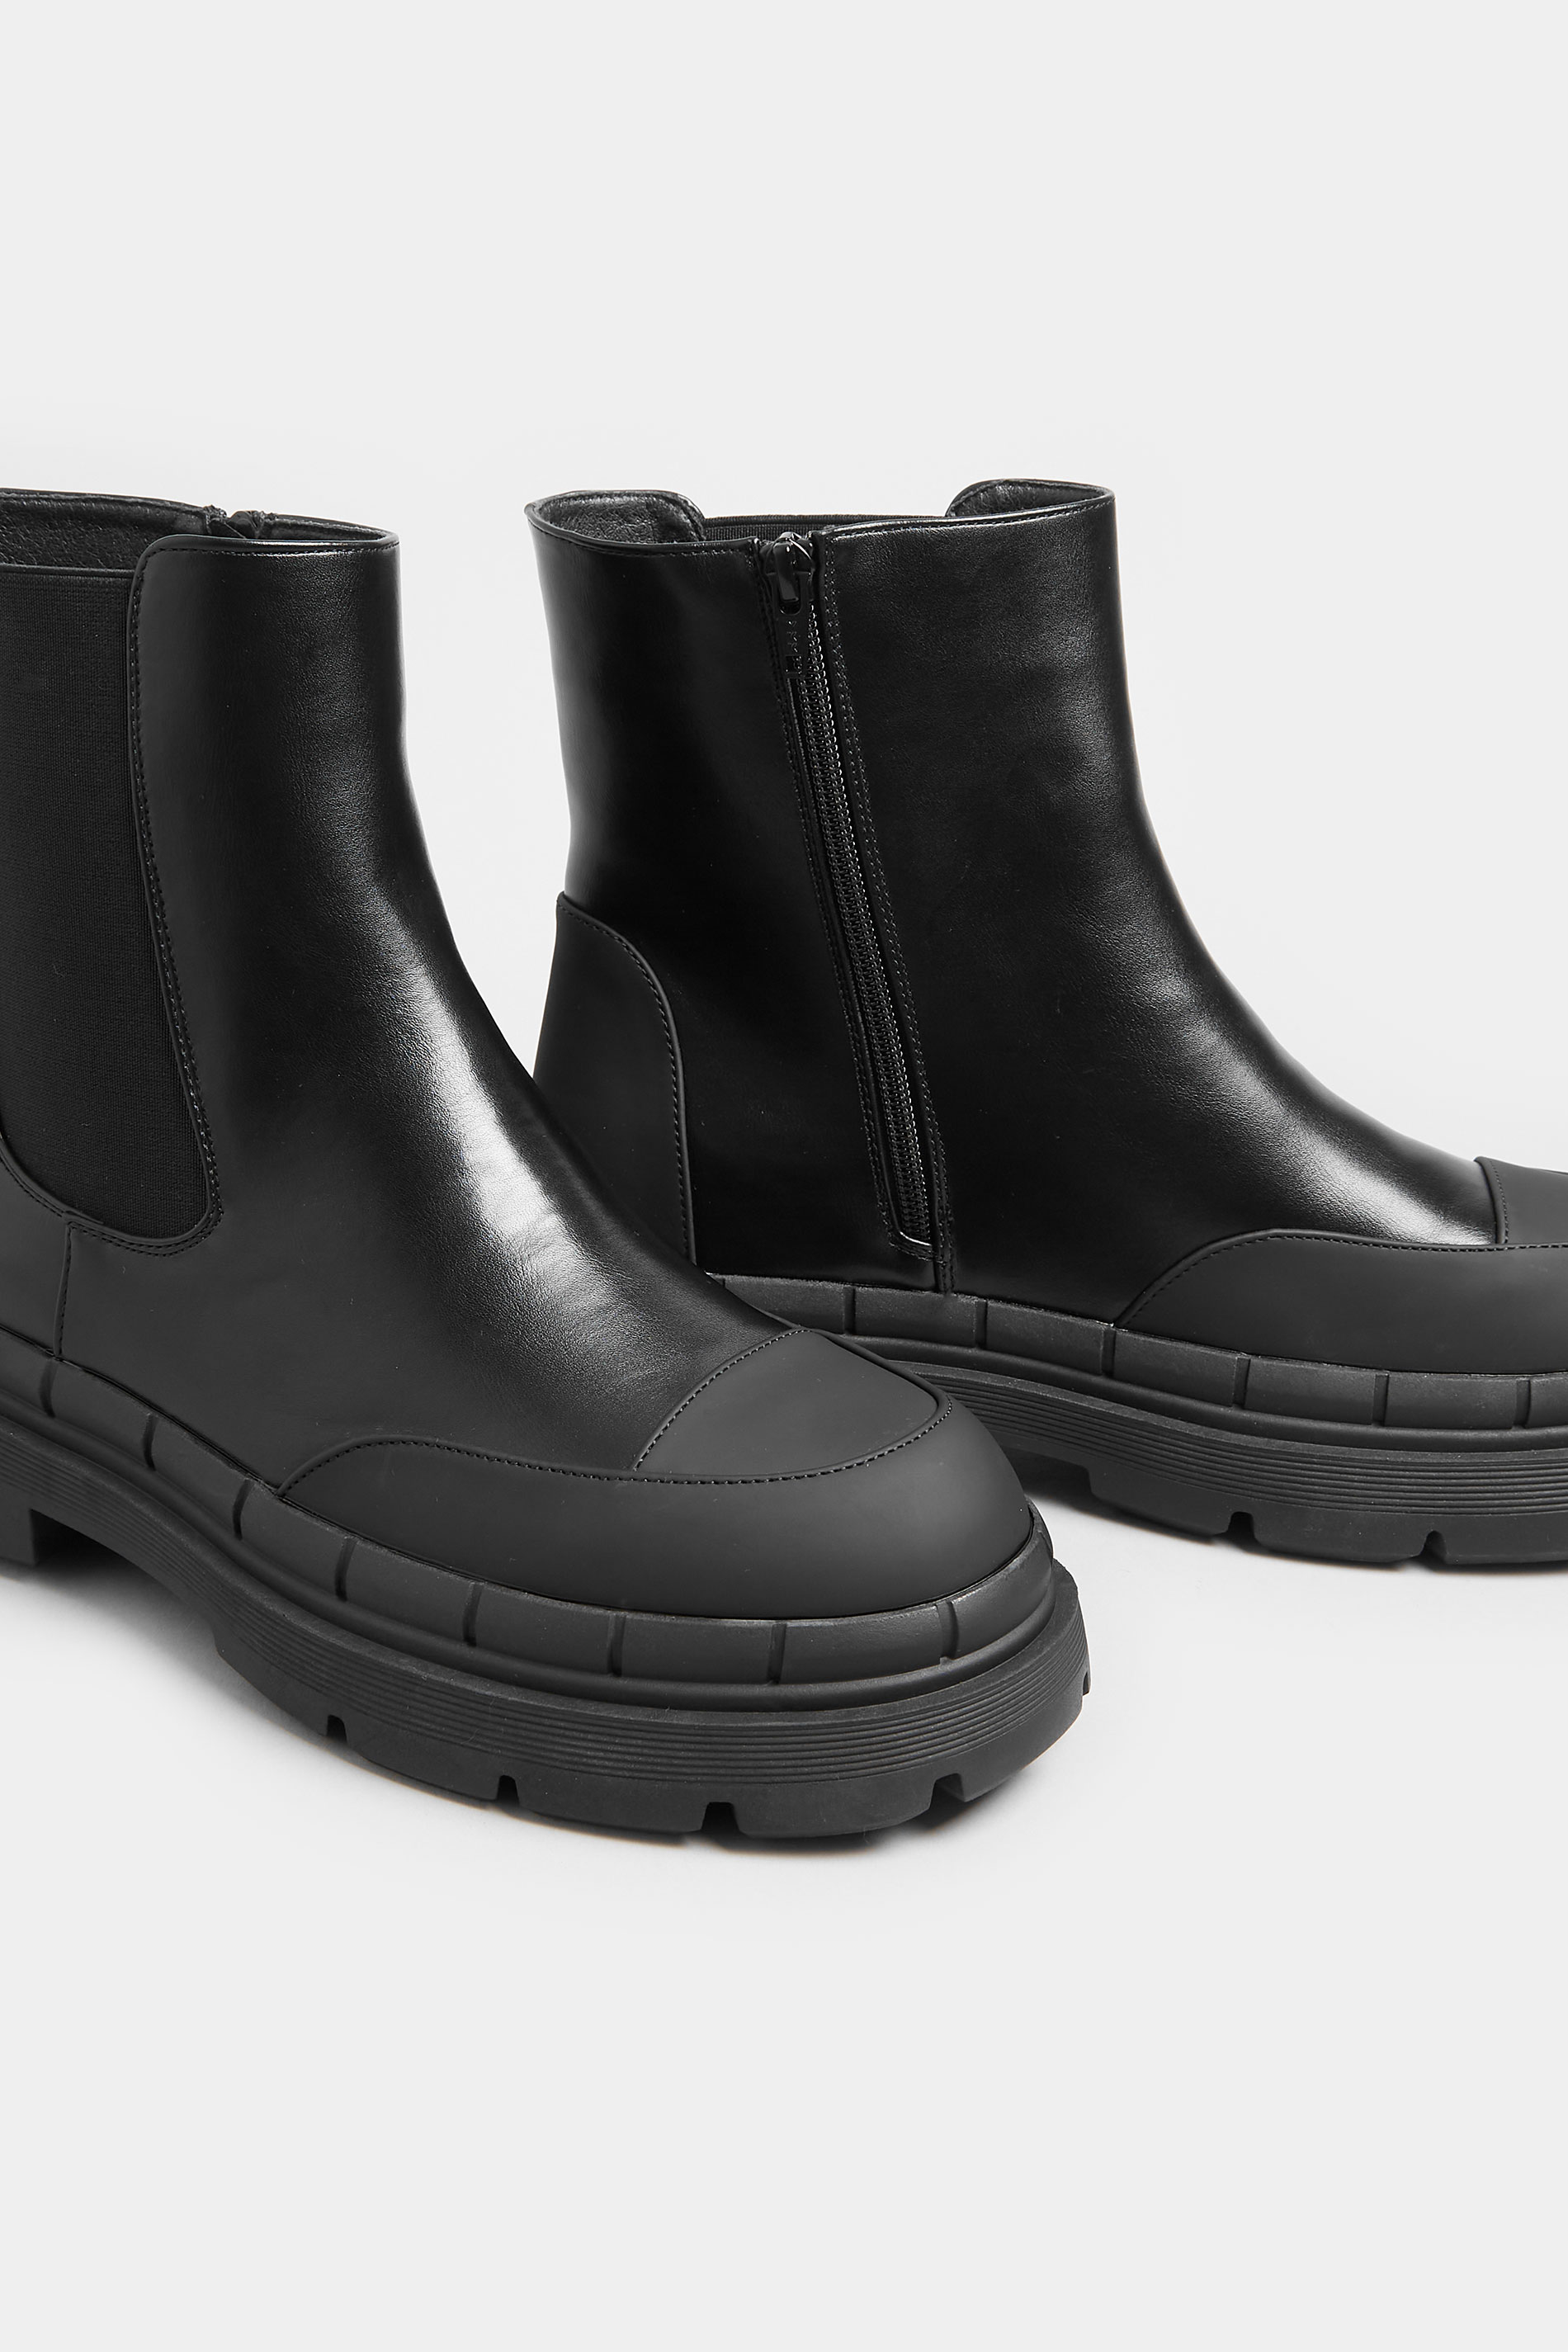 Black Chunky High Chelsea Boots In Wide E Fit | Yours Clothing